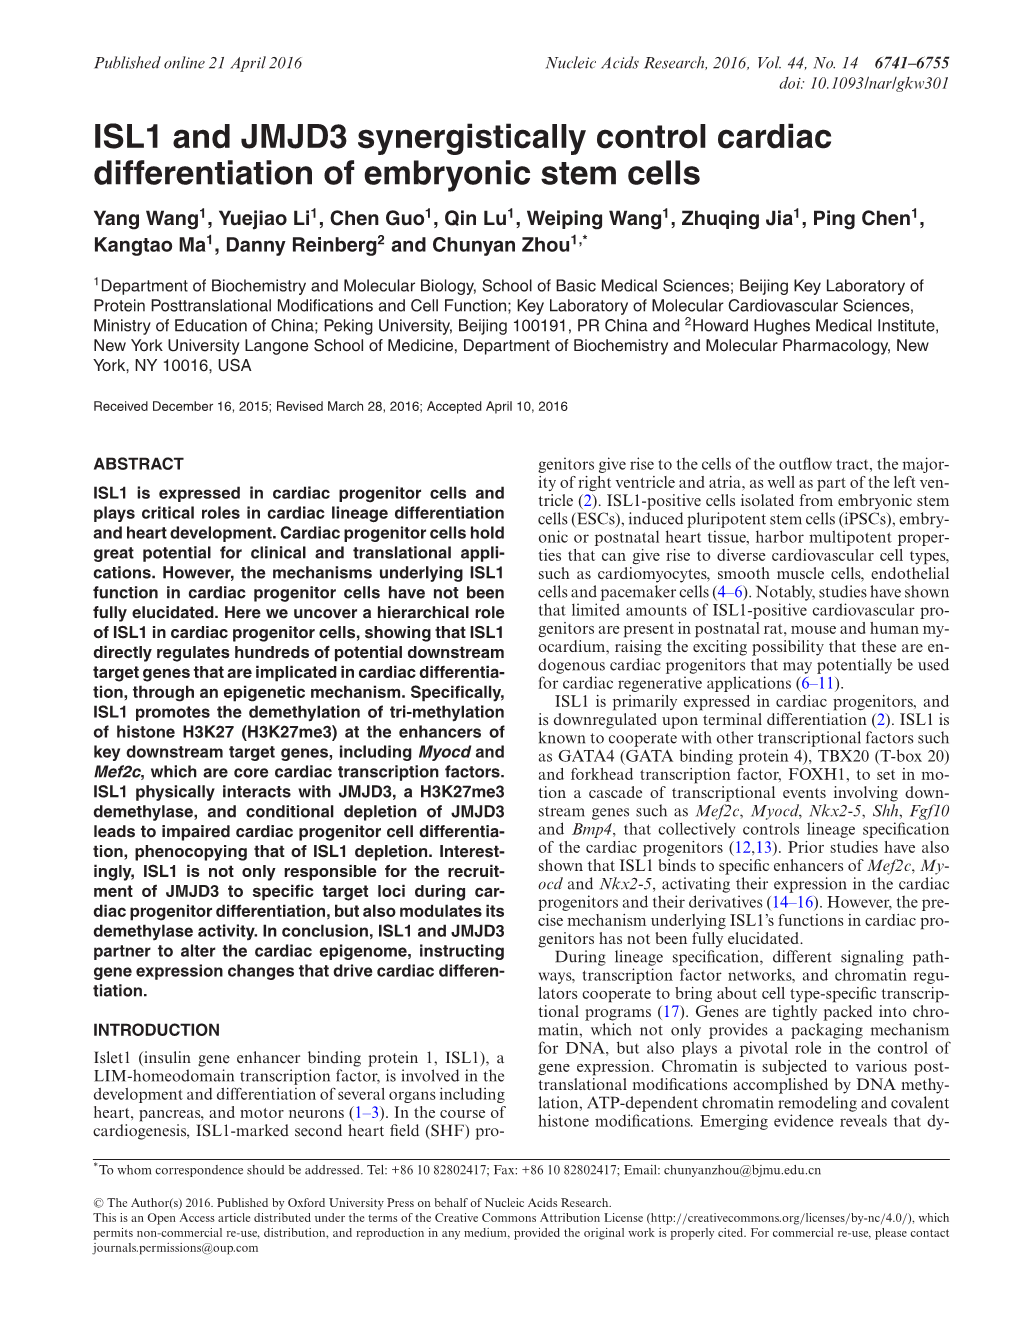 ISL1 and JMJD3 Synergistically Control Cardiac Differentiation of Embryonic Stem Cells